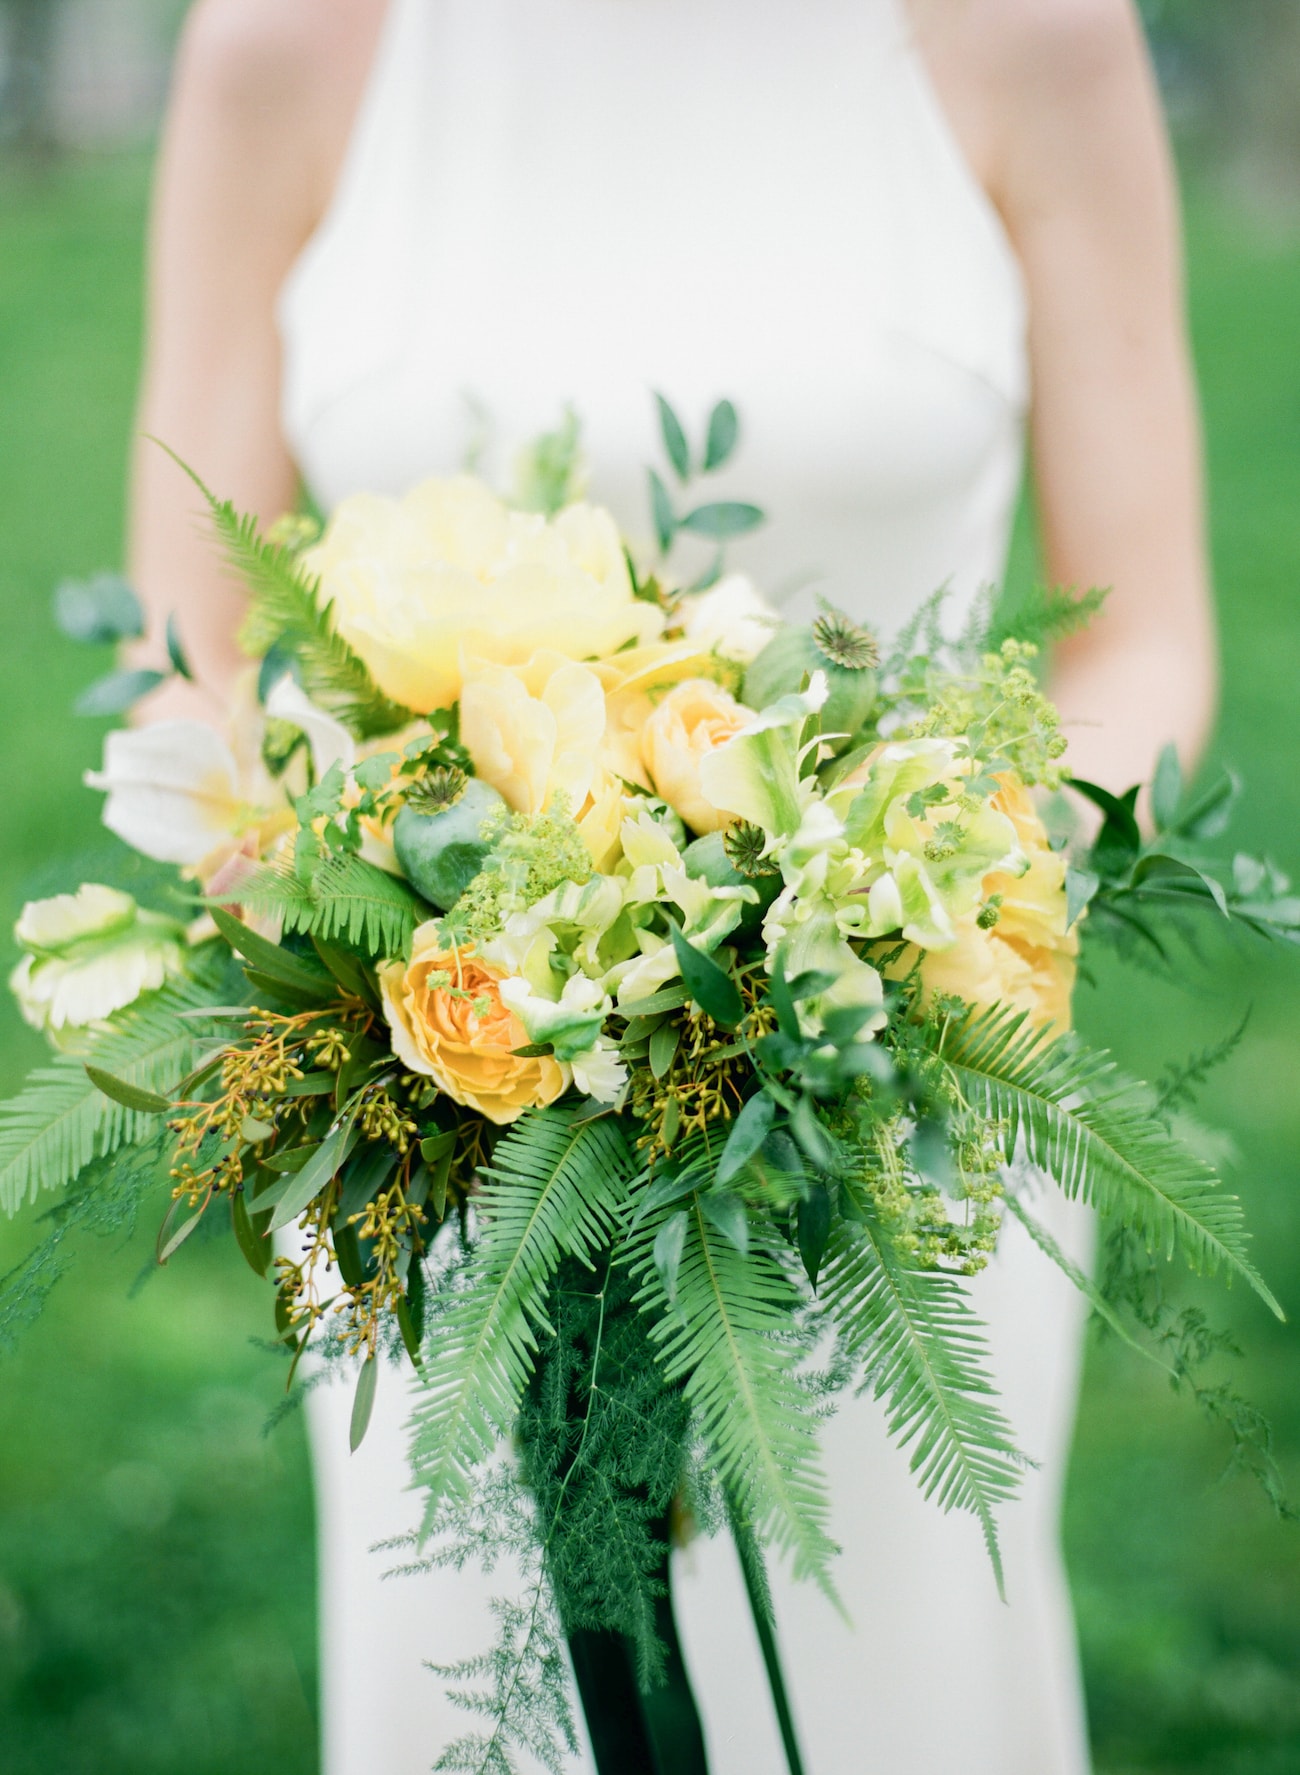 Tropical Yellow and Green Bouquet with Ferns | Credit: Ruth Eileen Photography